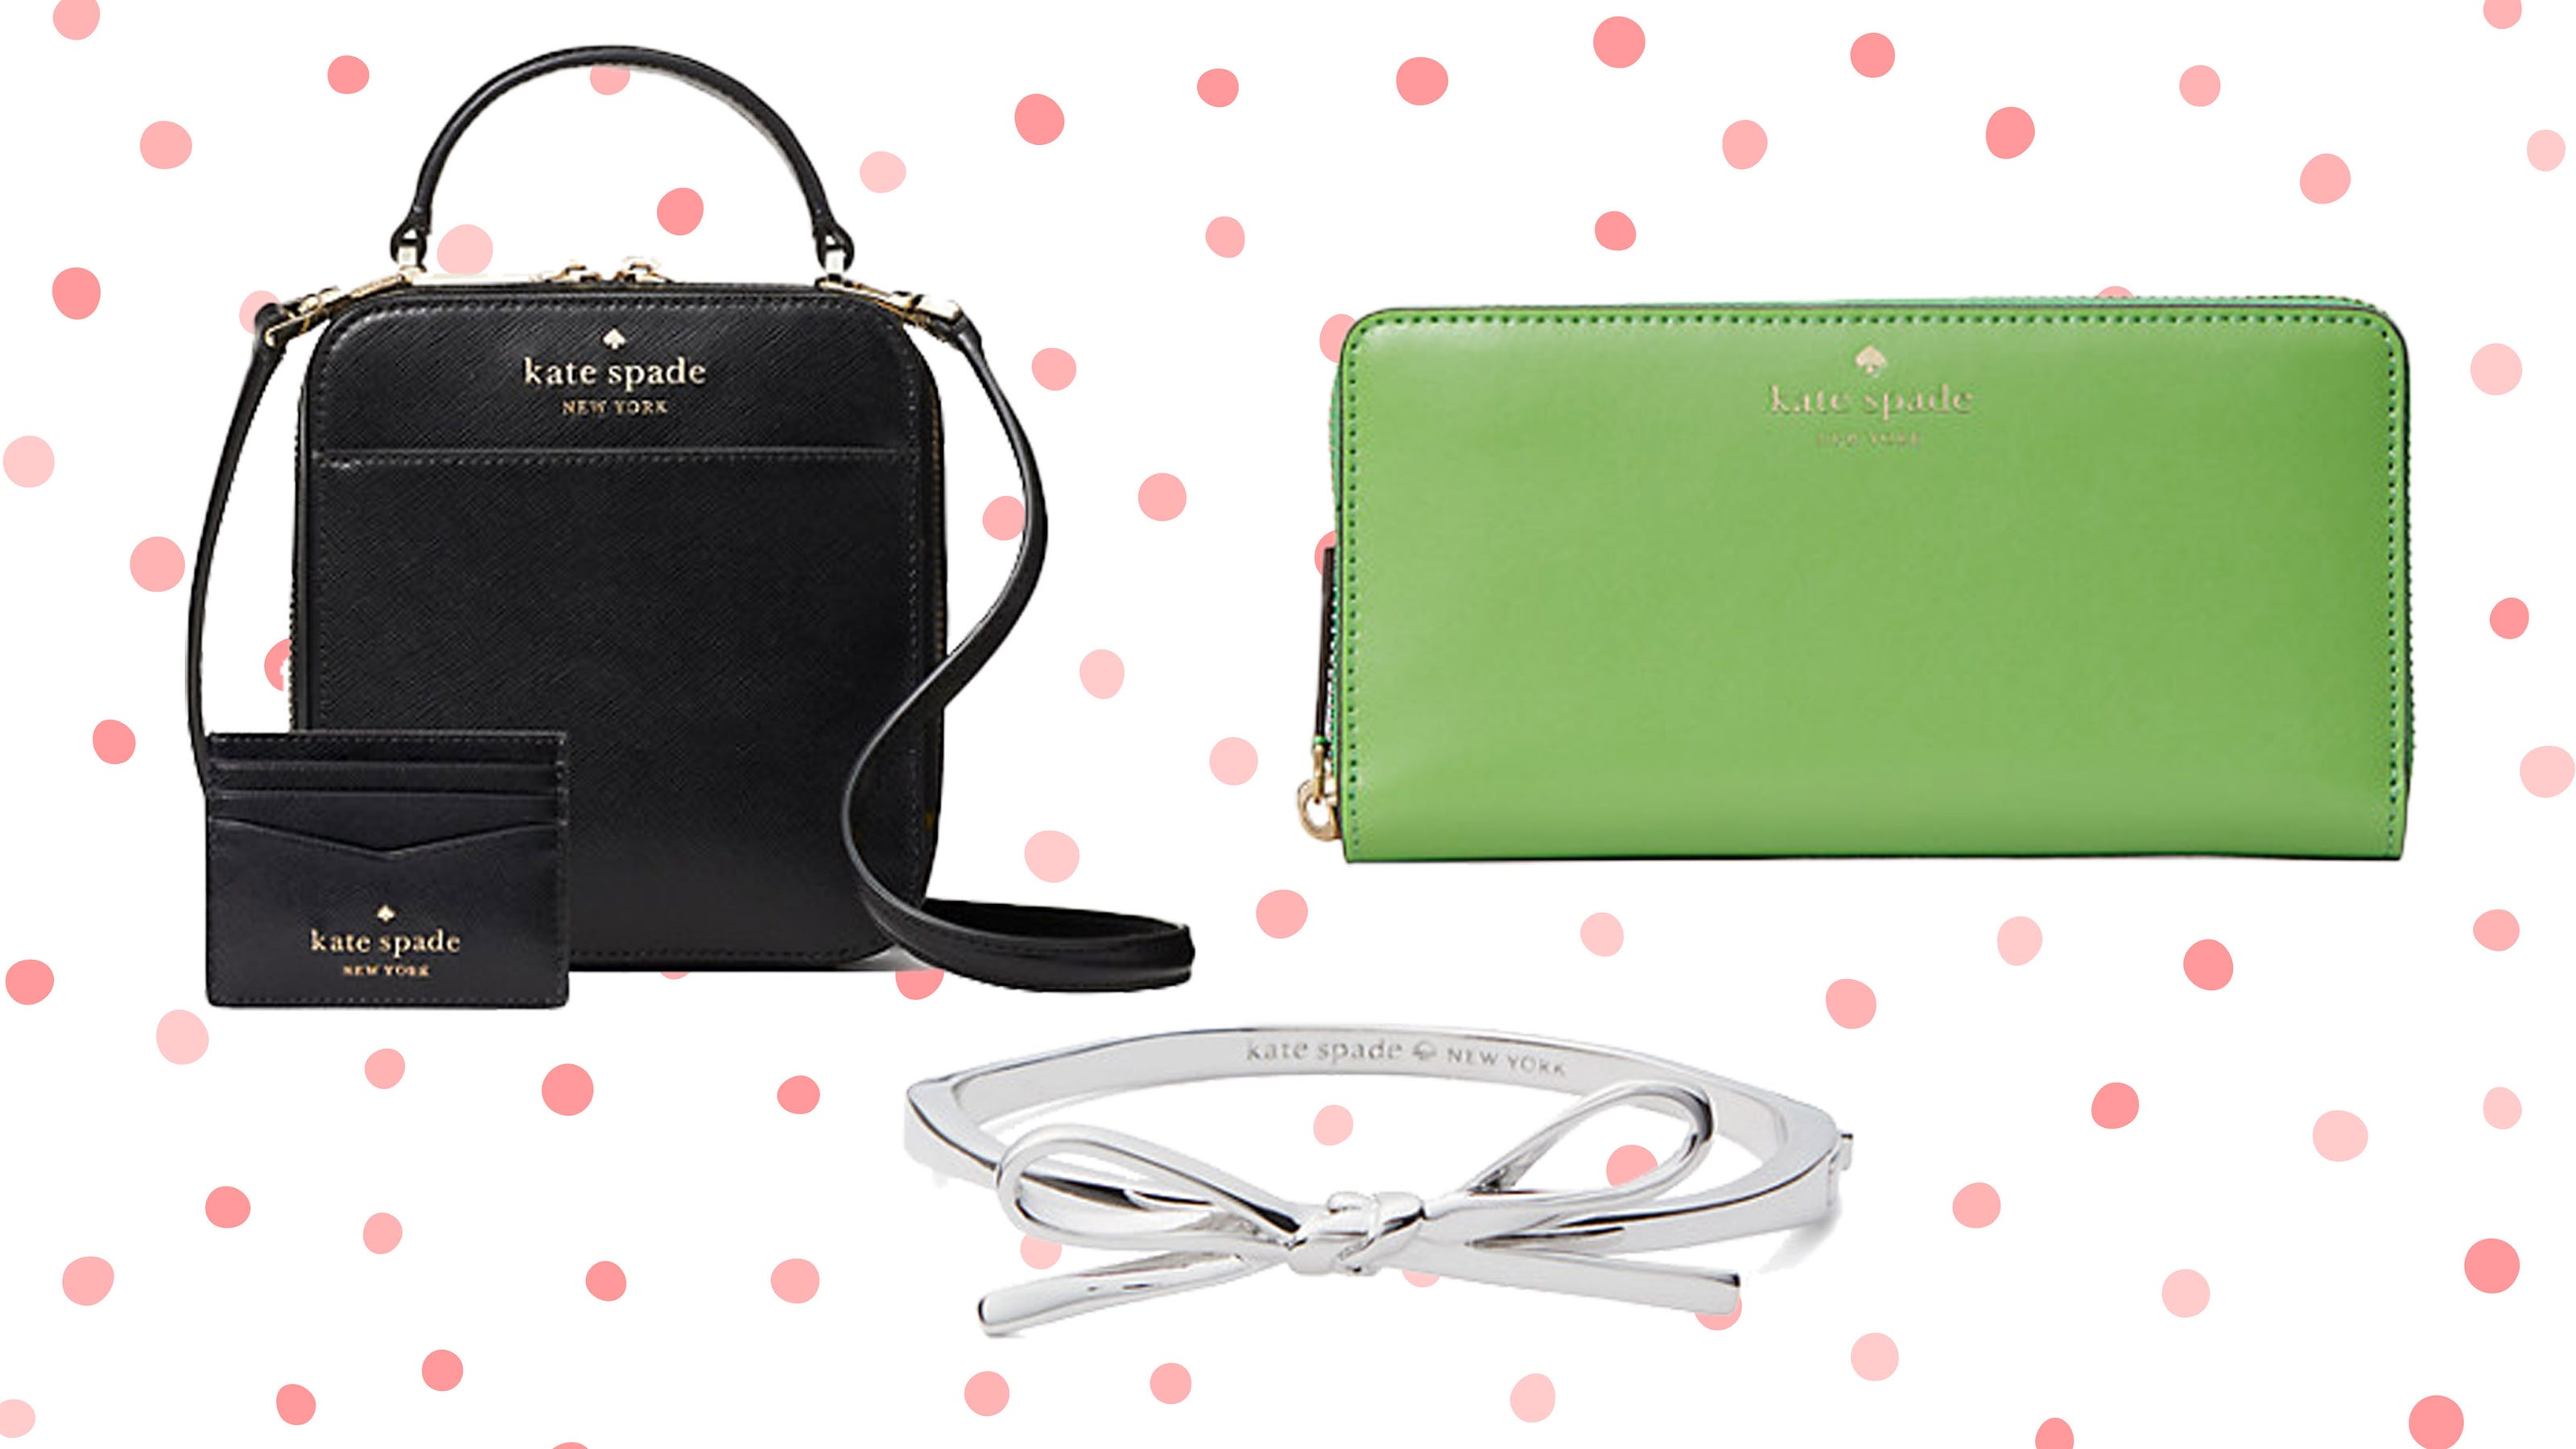 You can get a Kate Spade purse for up to 78% off plus a free gift today